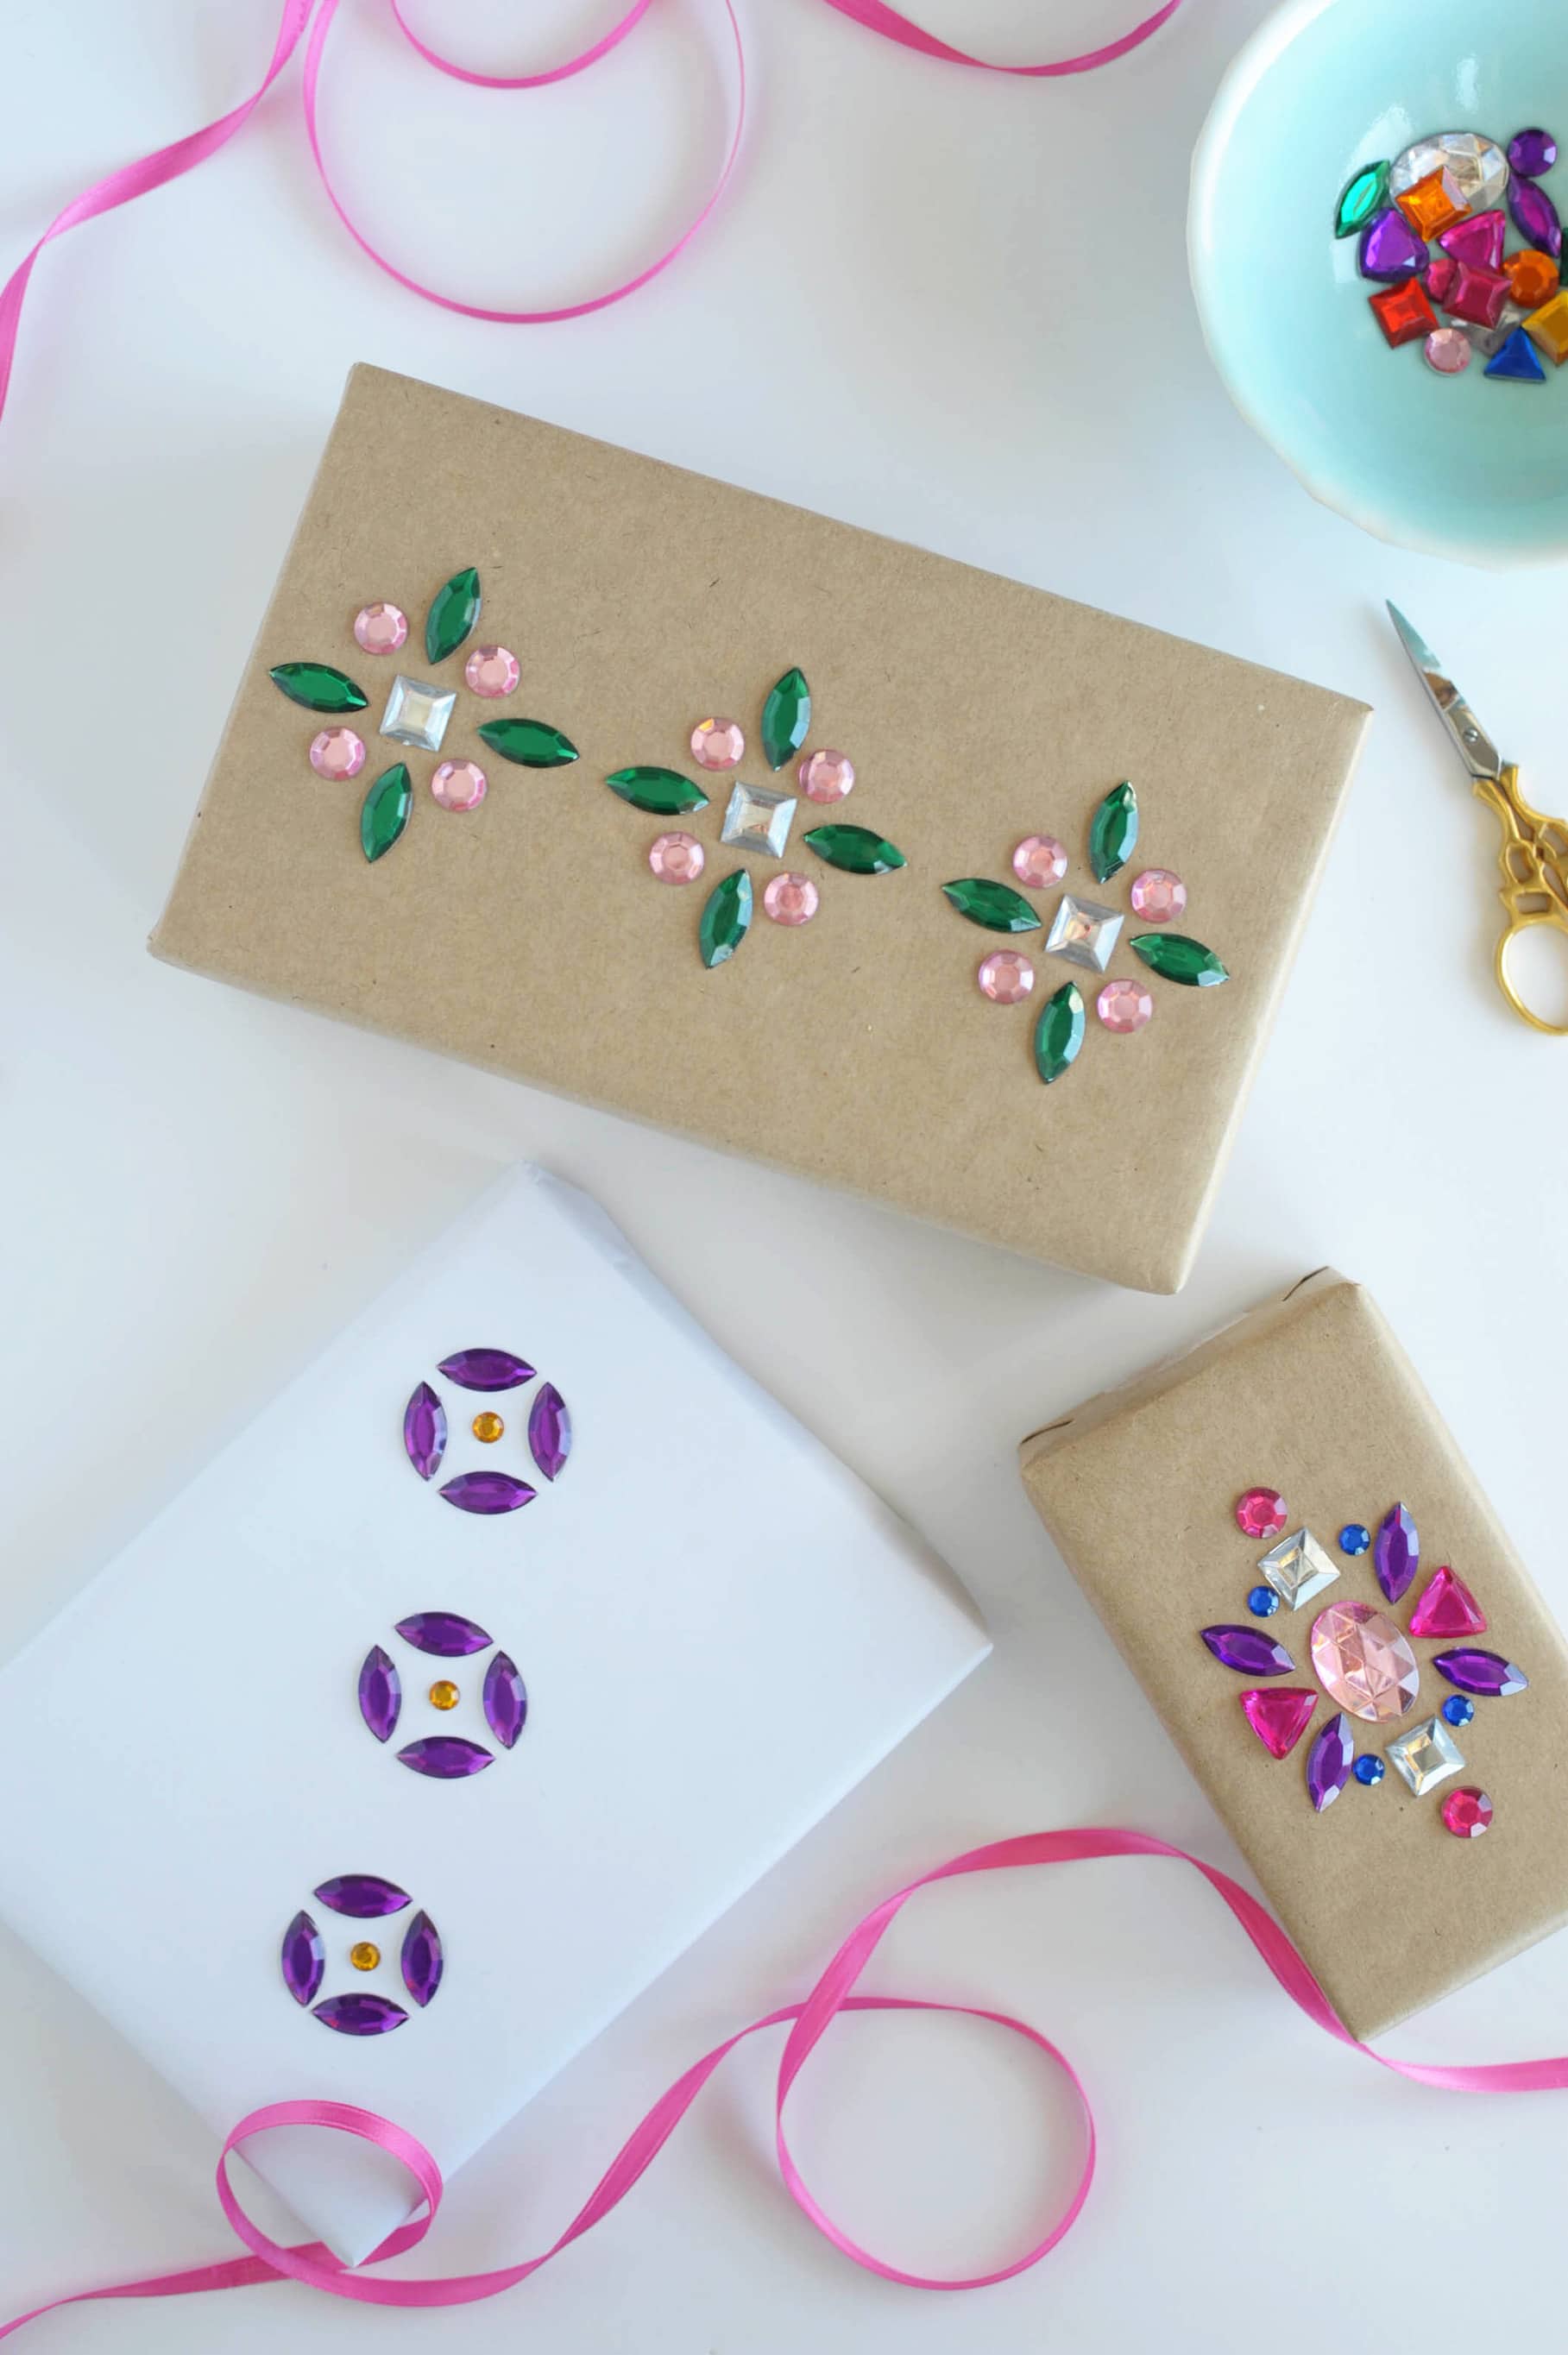 Add some color and pattern with jewels to make your gift wrapping special!